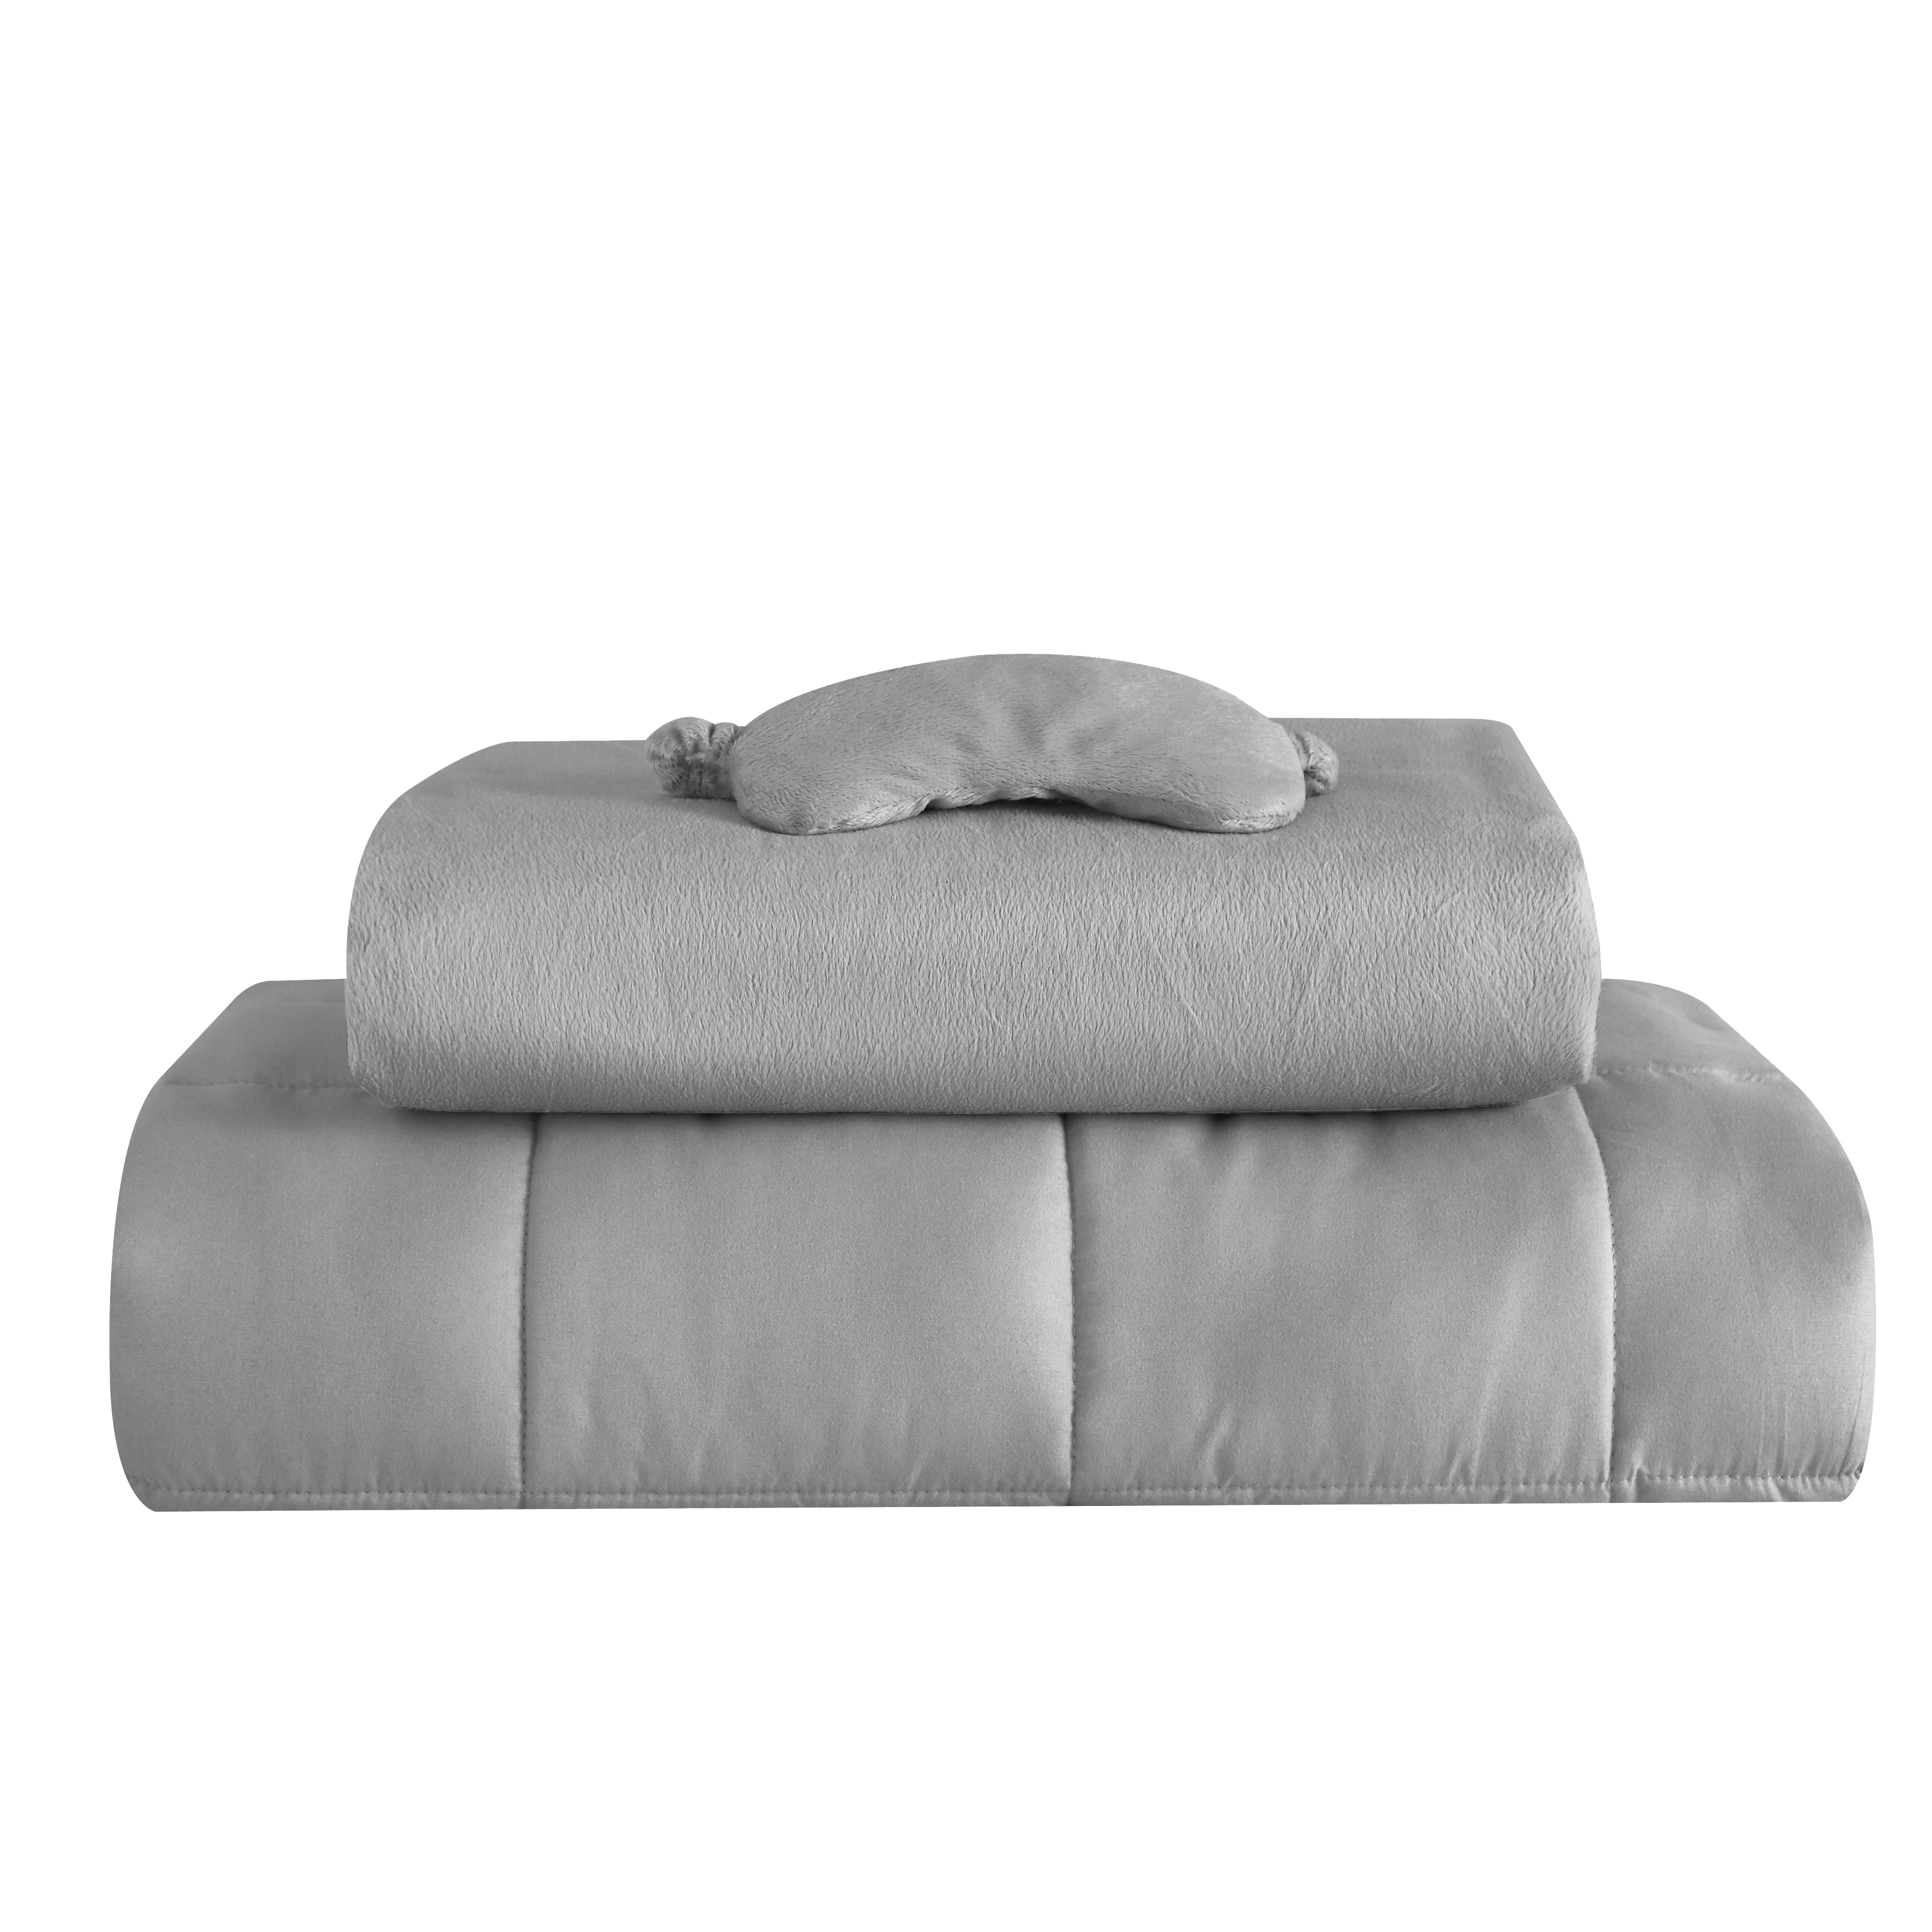 Well Being 3 Piece Weighted Blanket Set, Can I Use A Regular Duvet Cover On Weighted Blanket